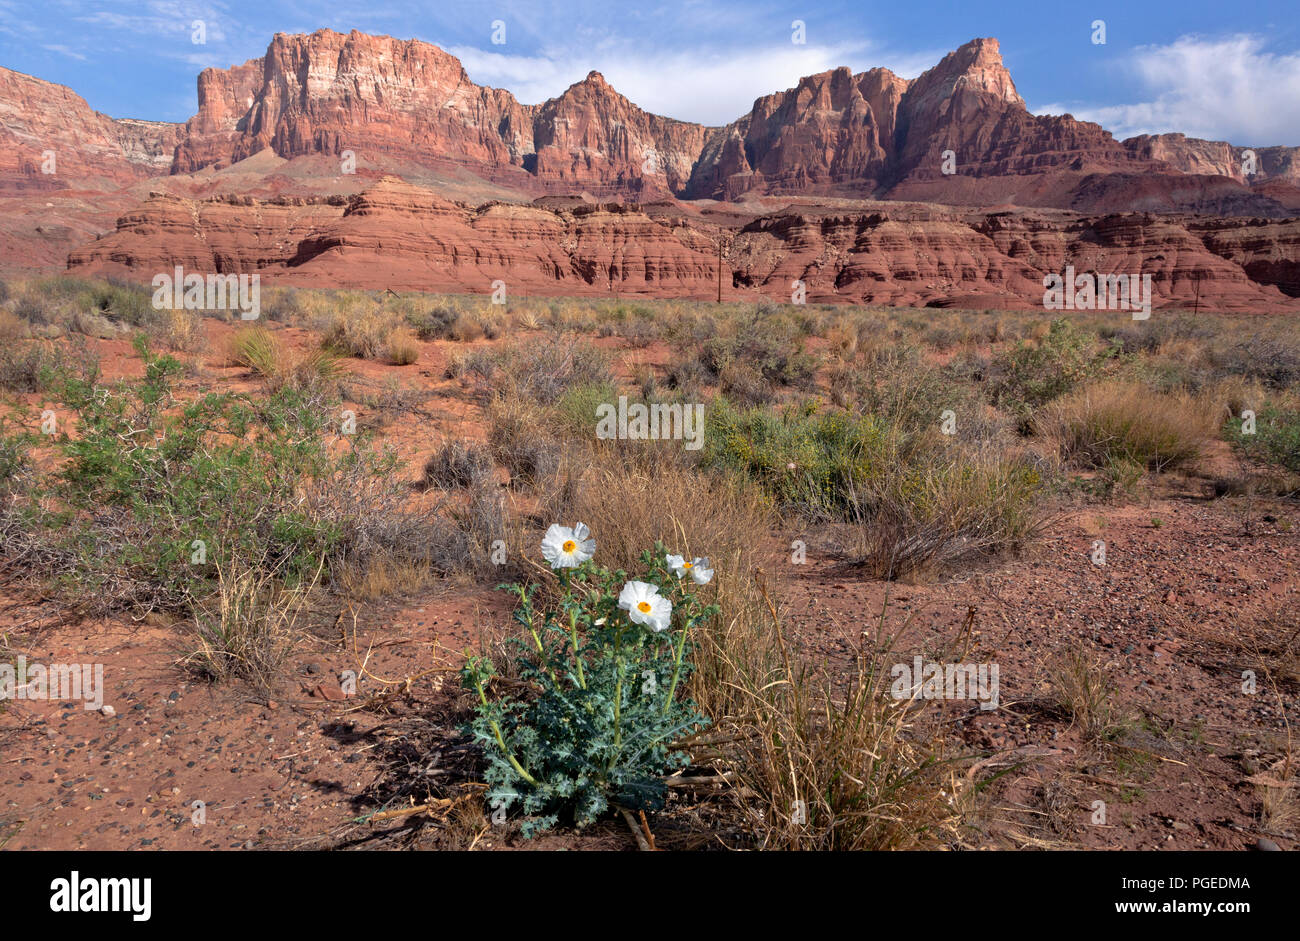 AZ00359-00...ARIZONA - A pickly poppy blooming in amoung the sage brush at the base of the Vermilion Cliffs in Glen Canyon National Recreation Area. Stock Photo